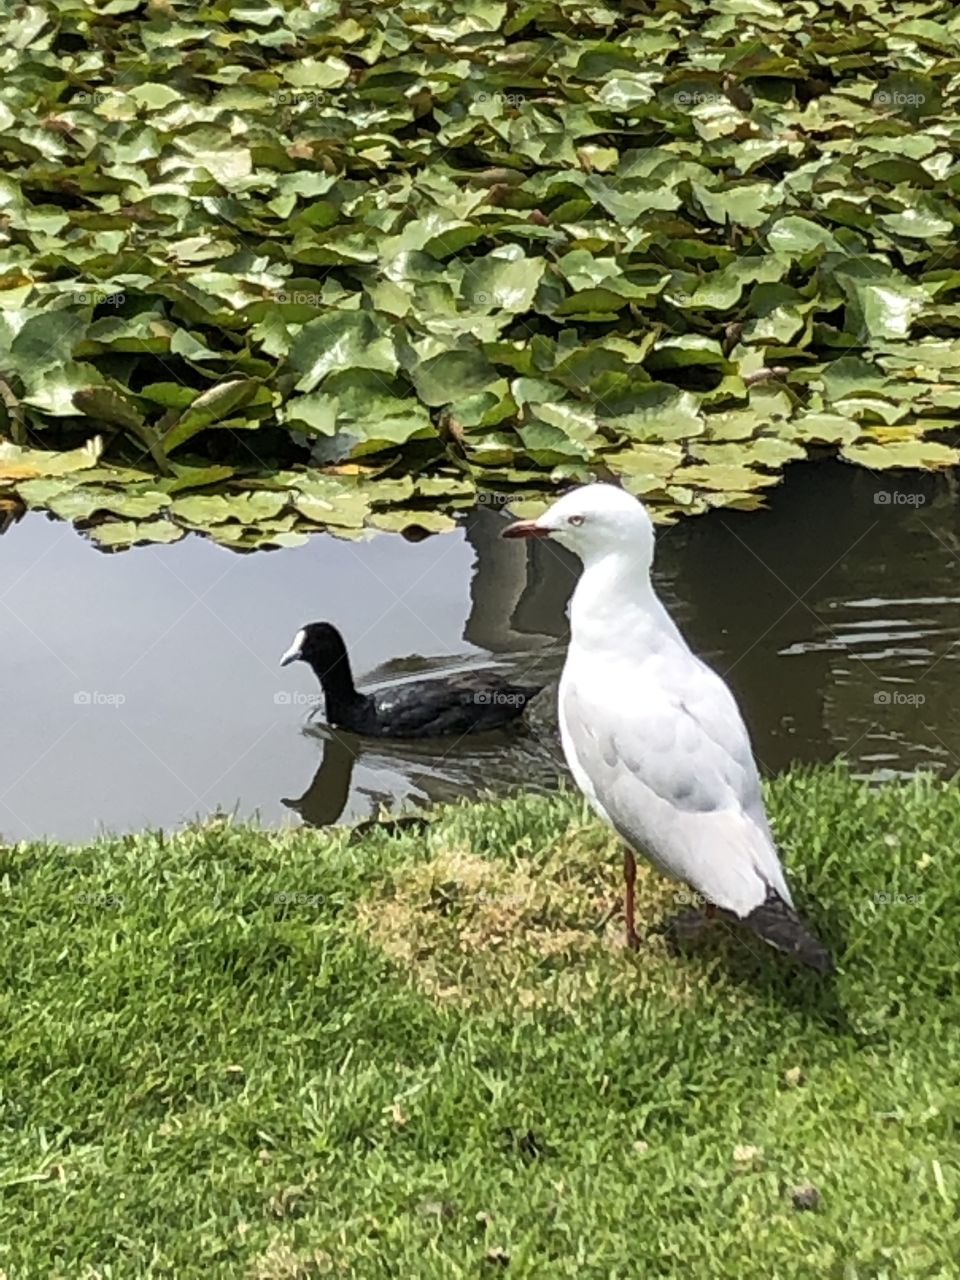 A white bird on the lawn and a black bird in the pond